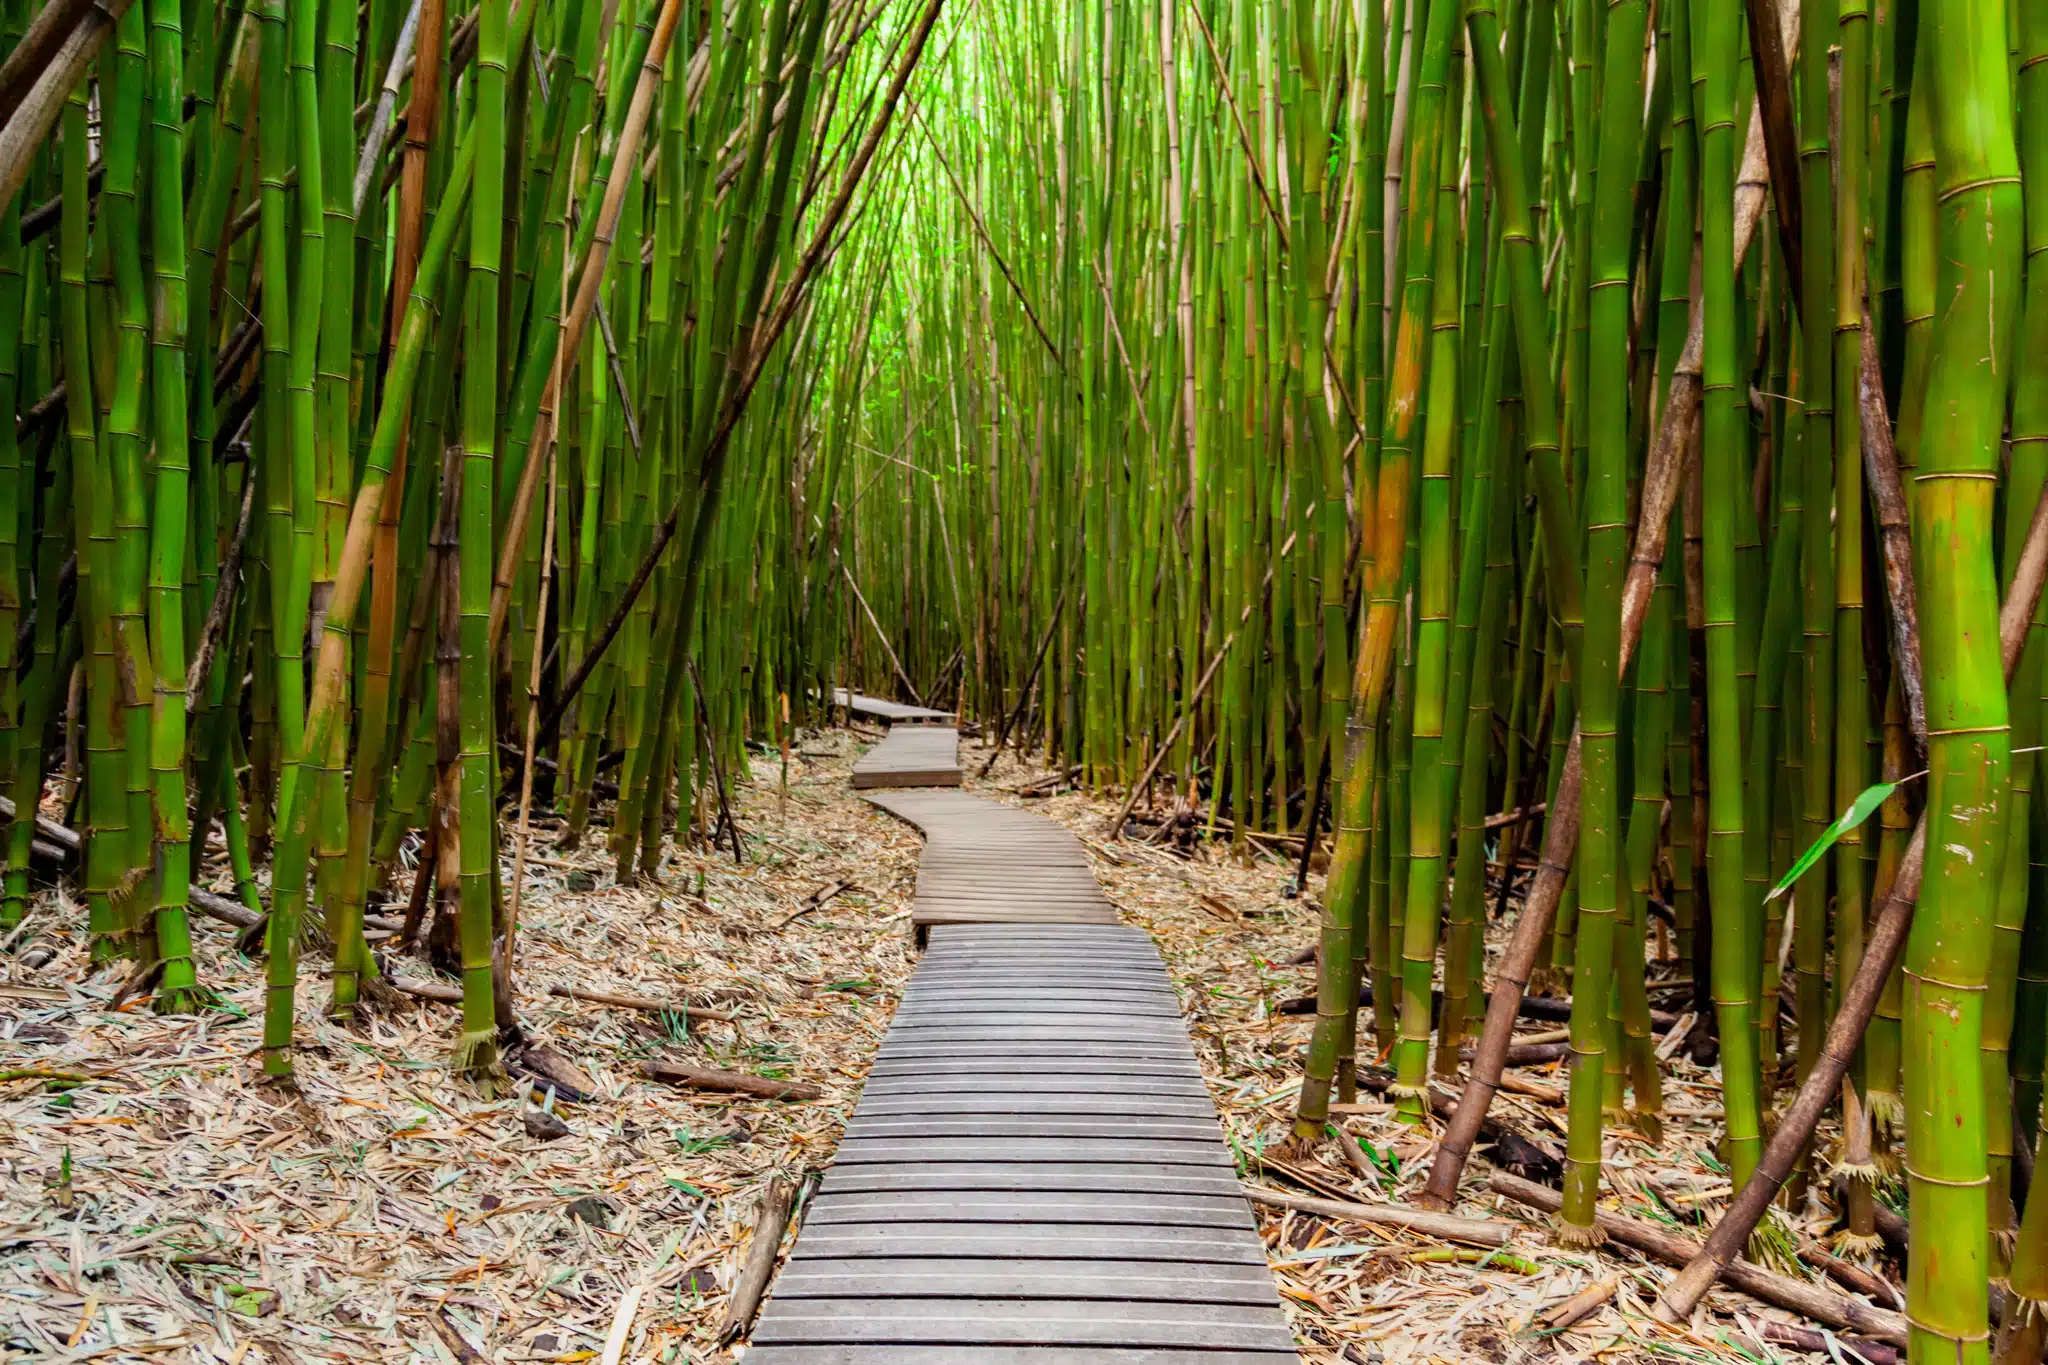 Bamboo Forest Hike is a Hiking Trail located in the city of Hana on Maui, Hawaii